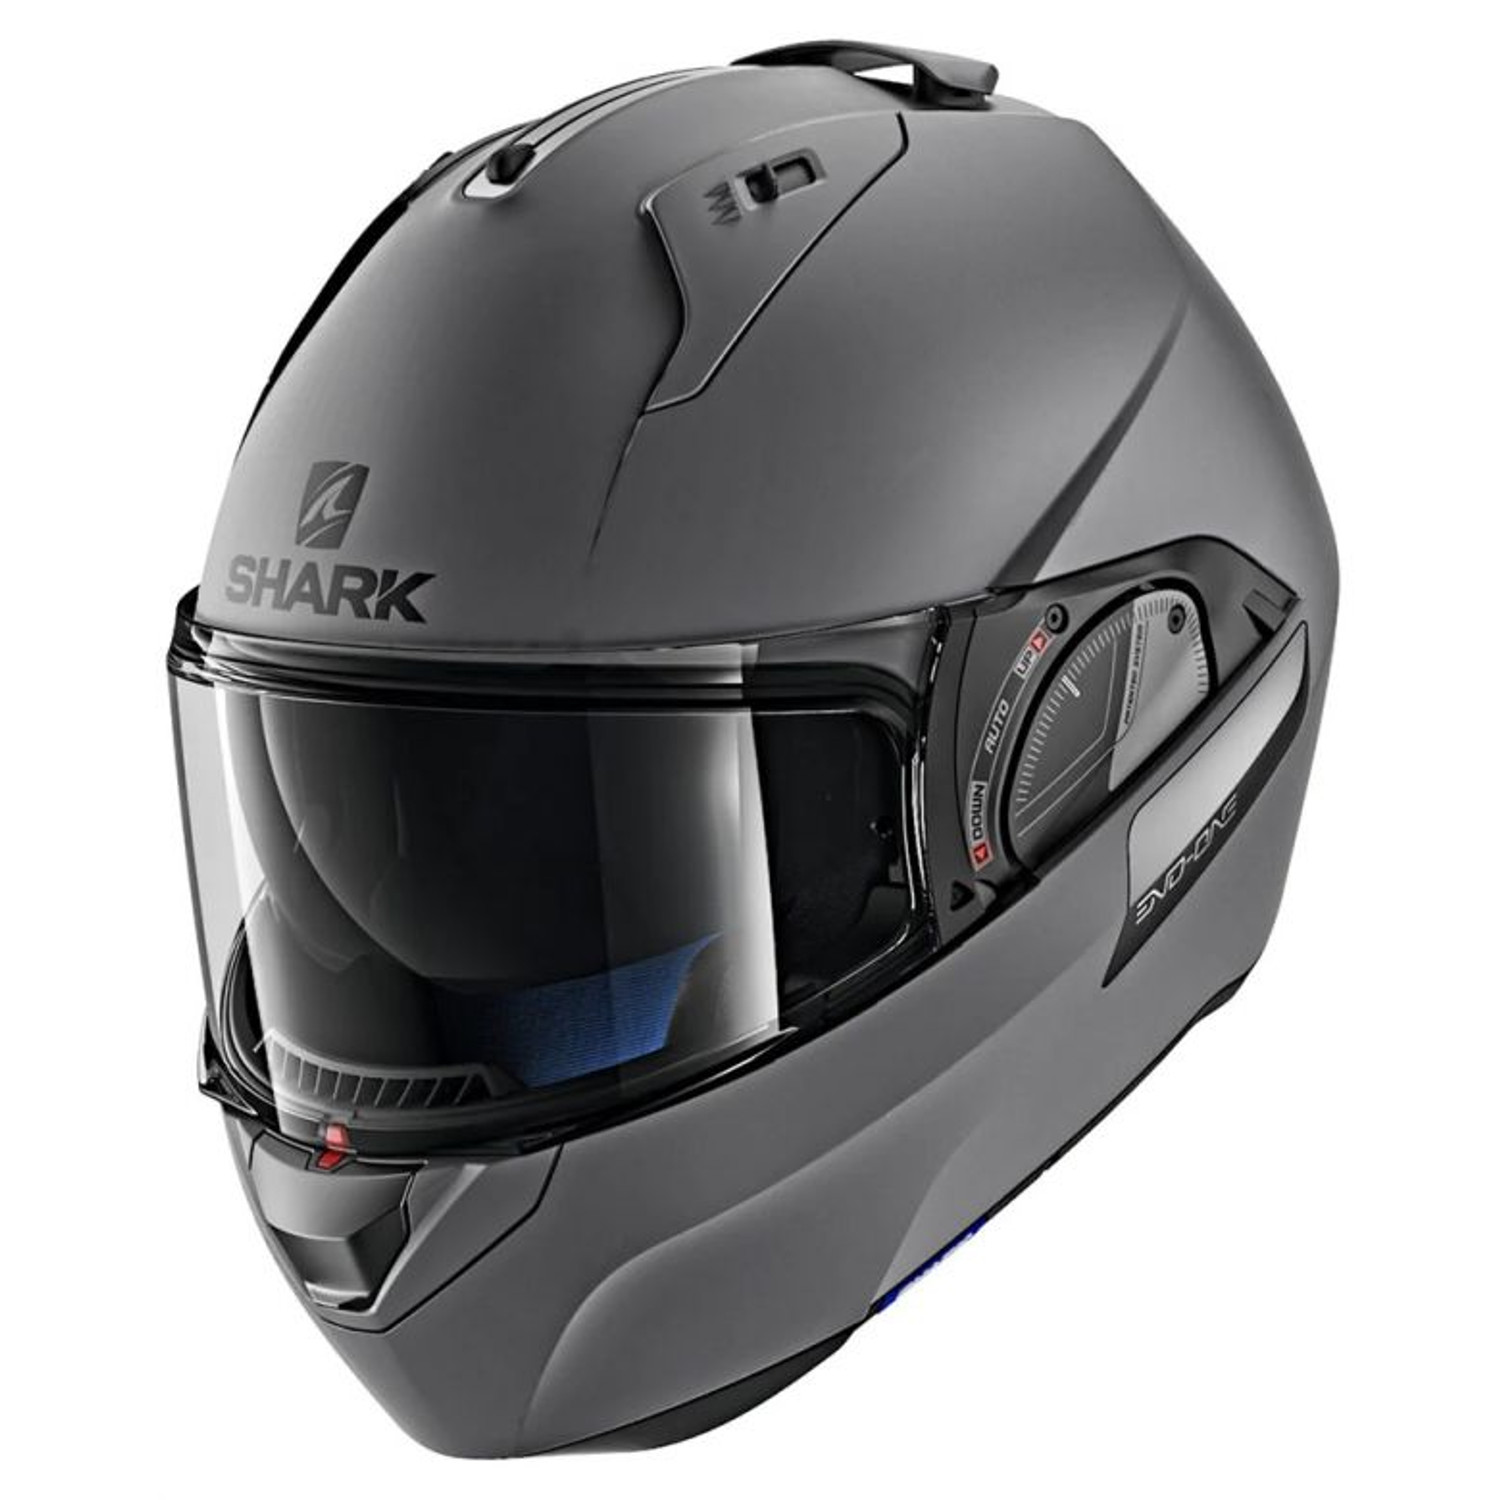 Shark Evo One 2 Helmet Motorcycle Closeouts by Rider Approved LLC